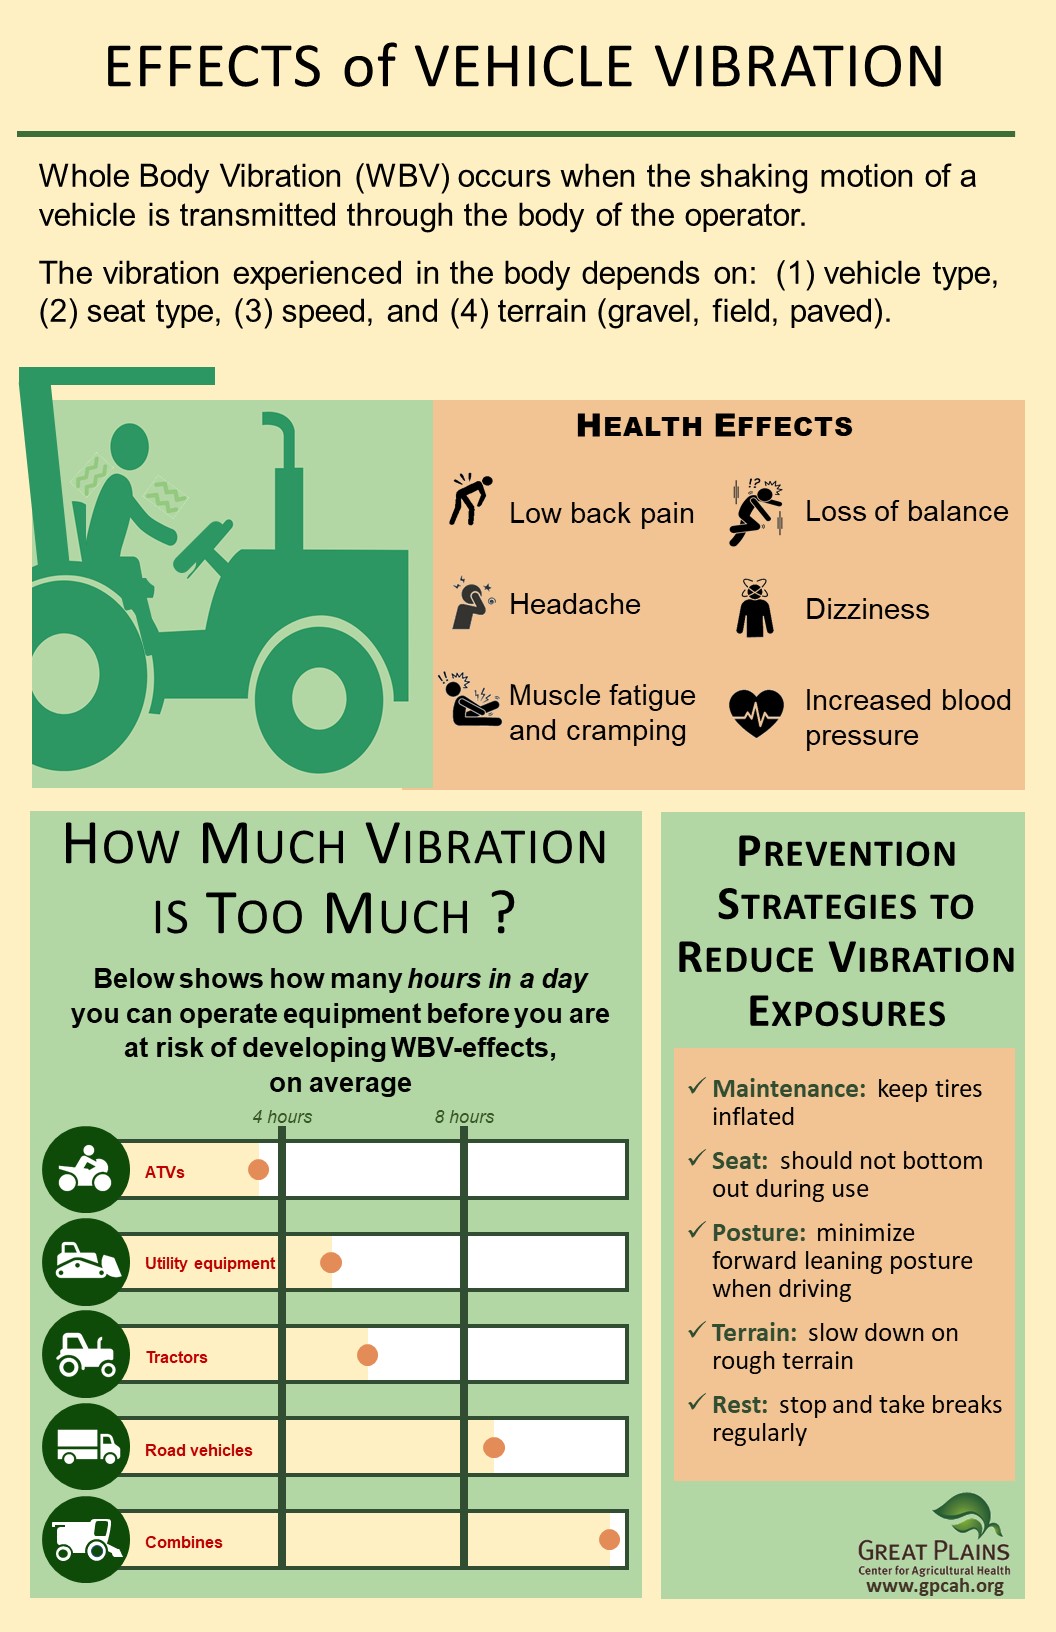 Why You Should Use Whole Body Vibration With Every Patient